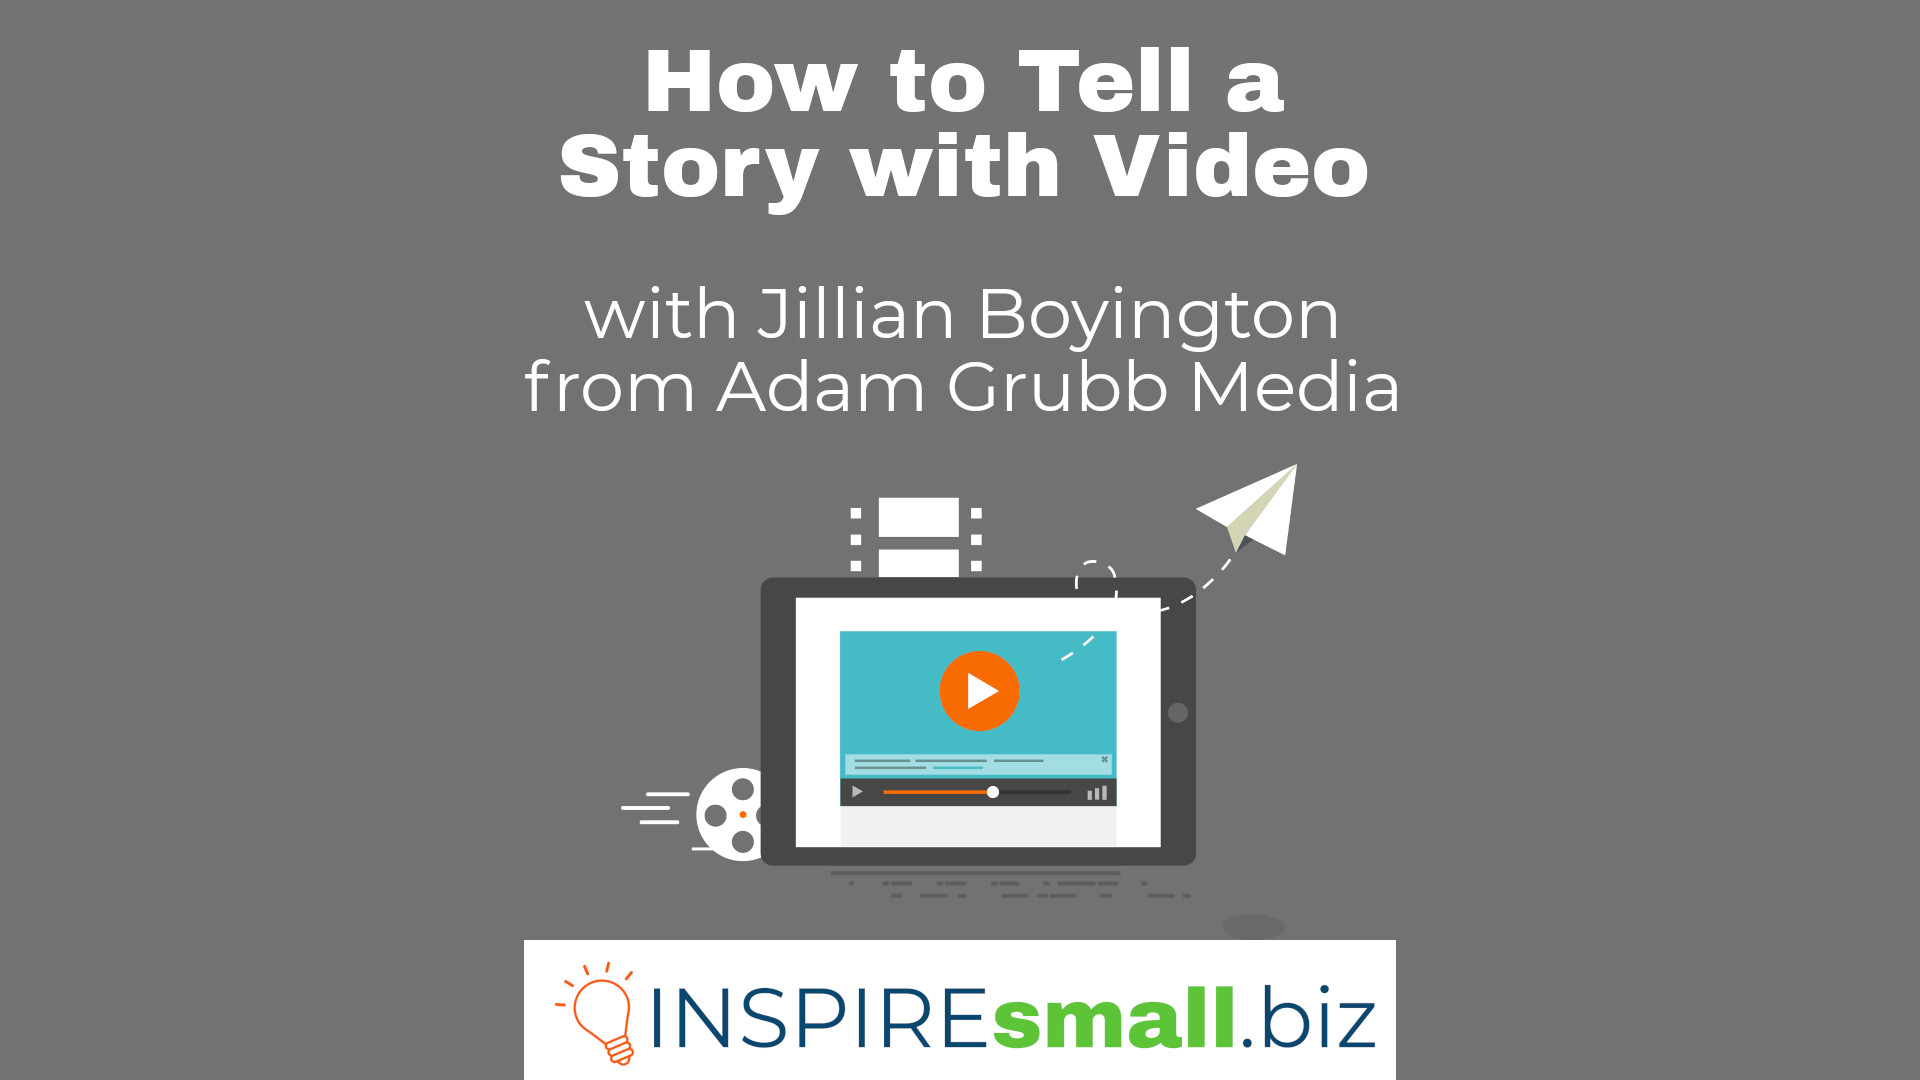 How to Tell a Story with Video